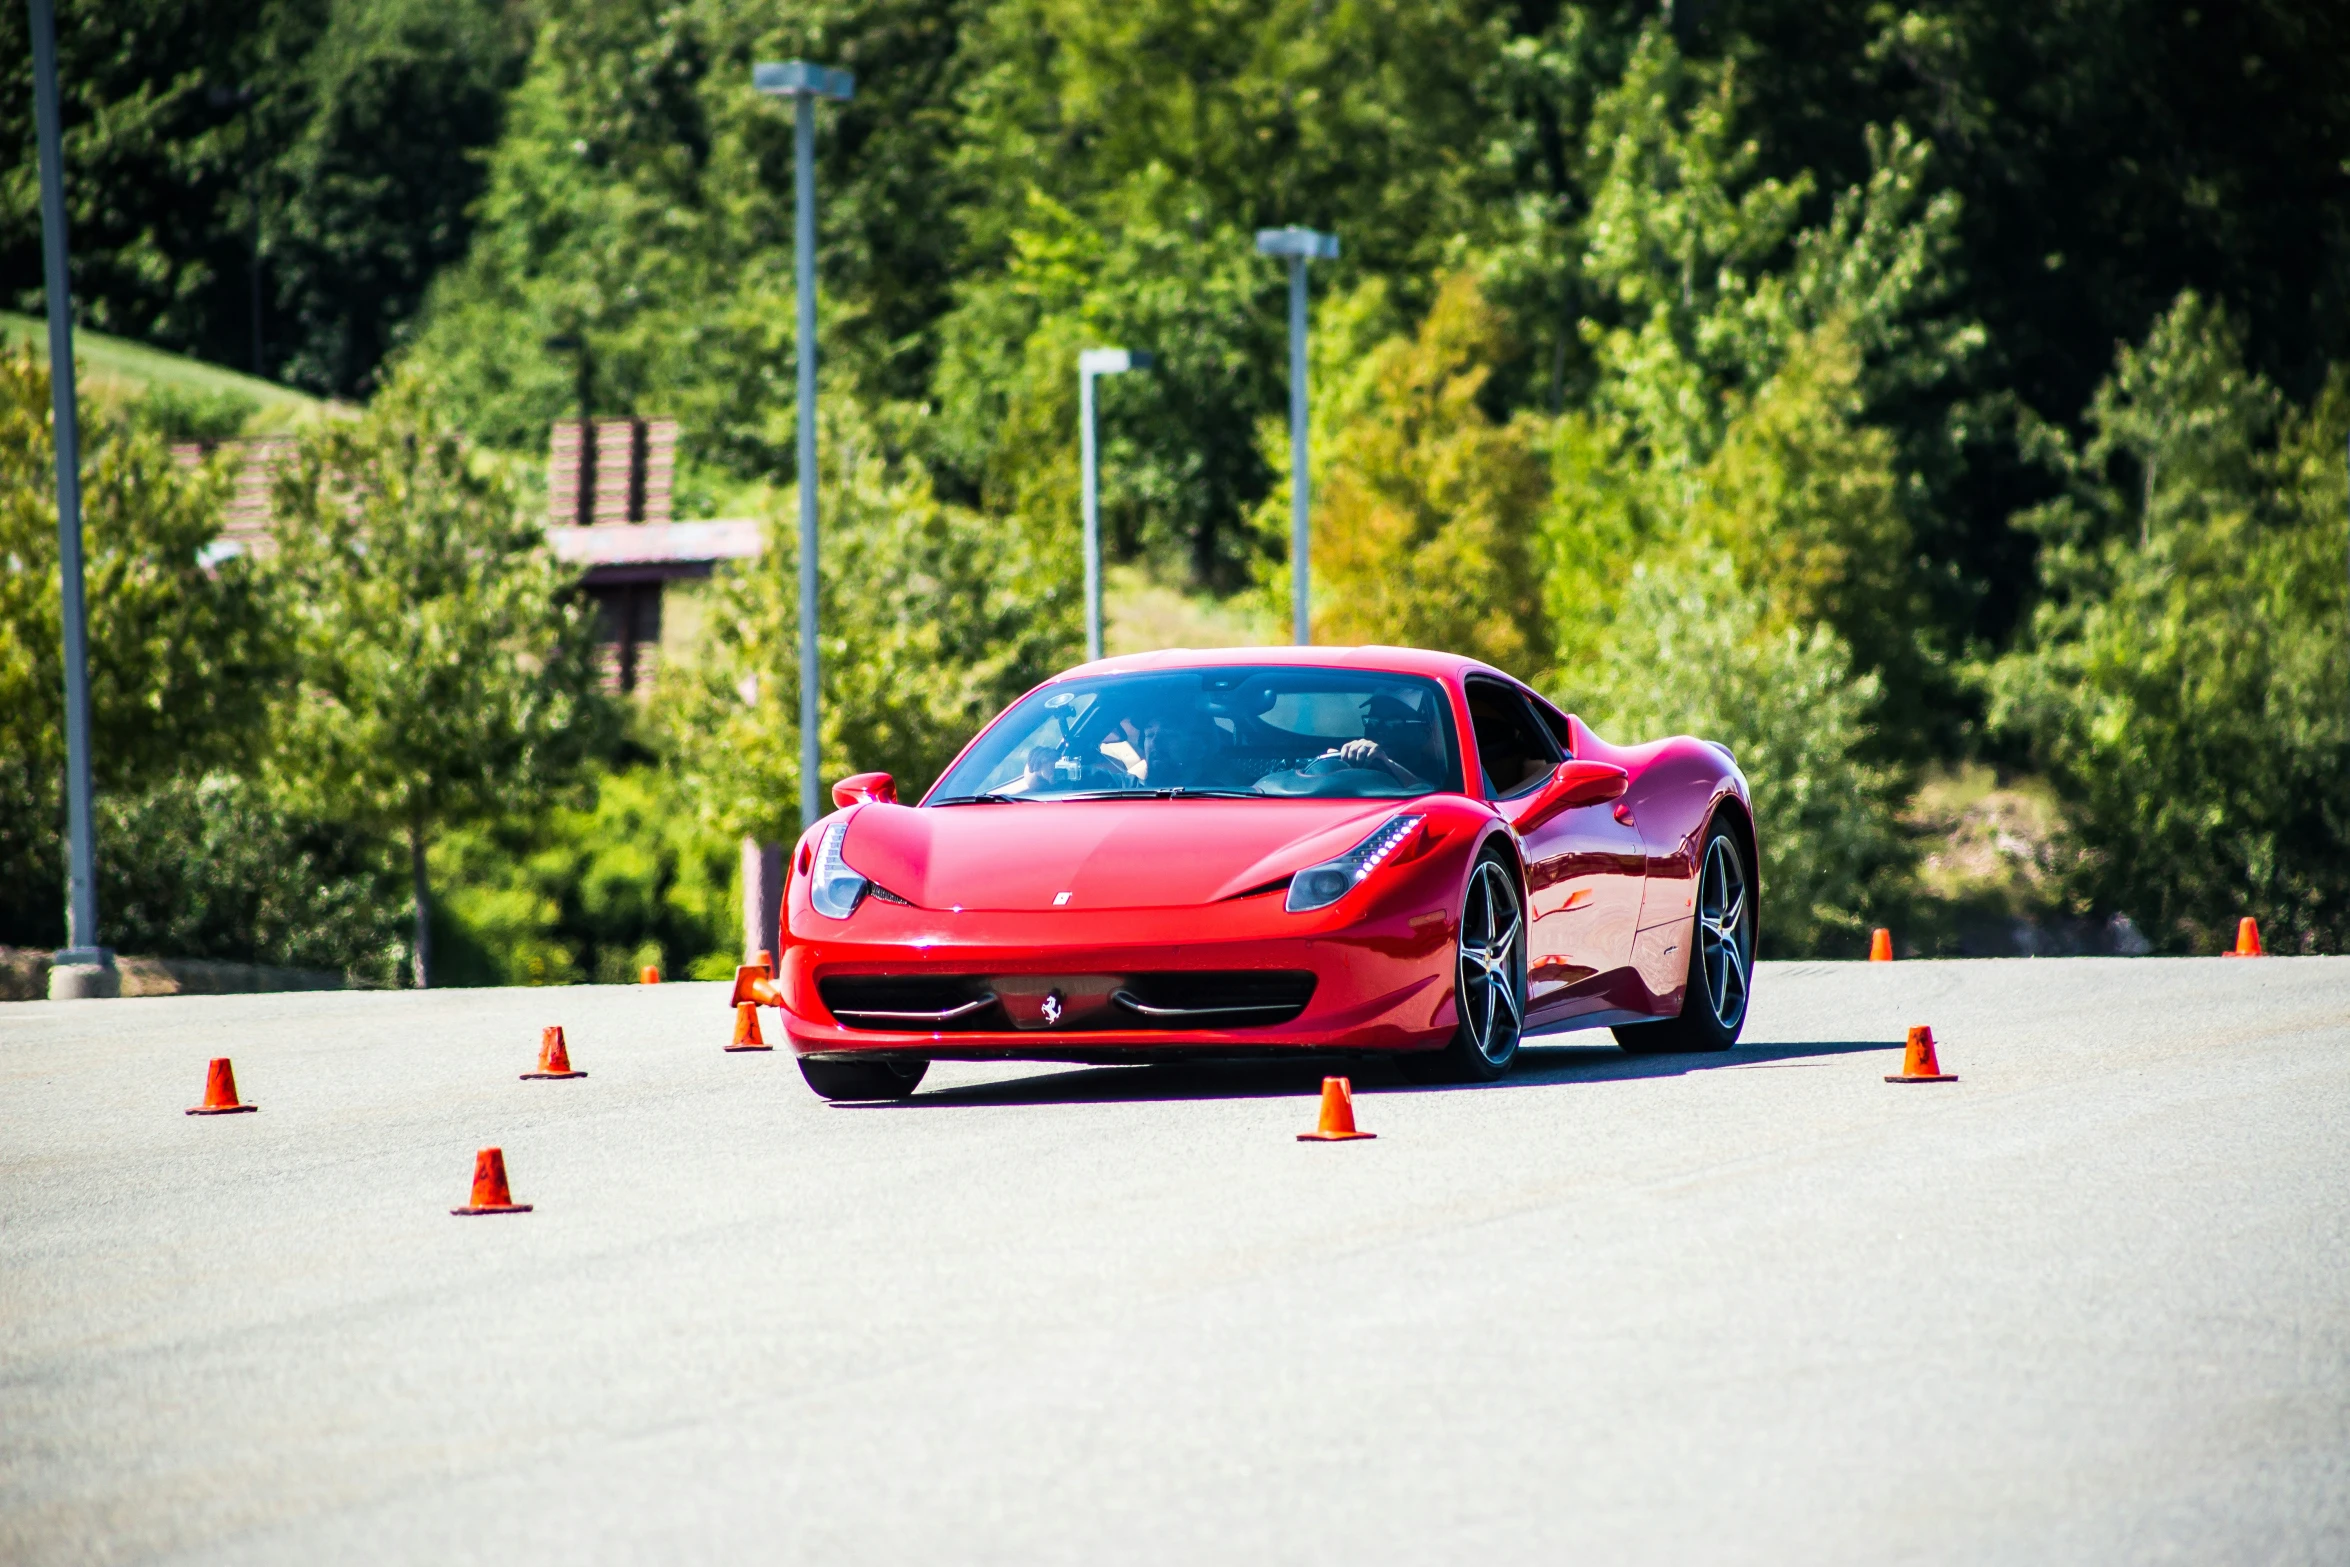 the red sports car is driving in front of cones